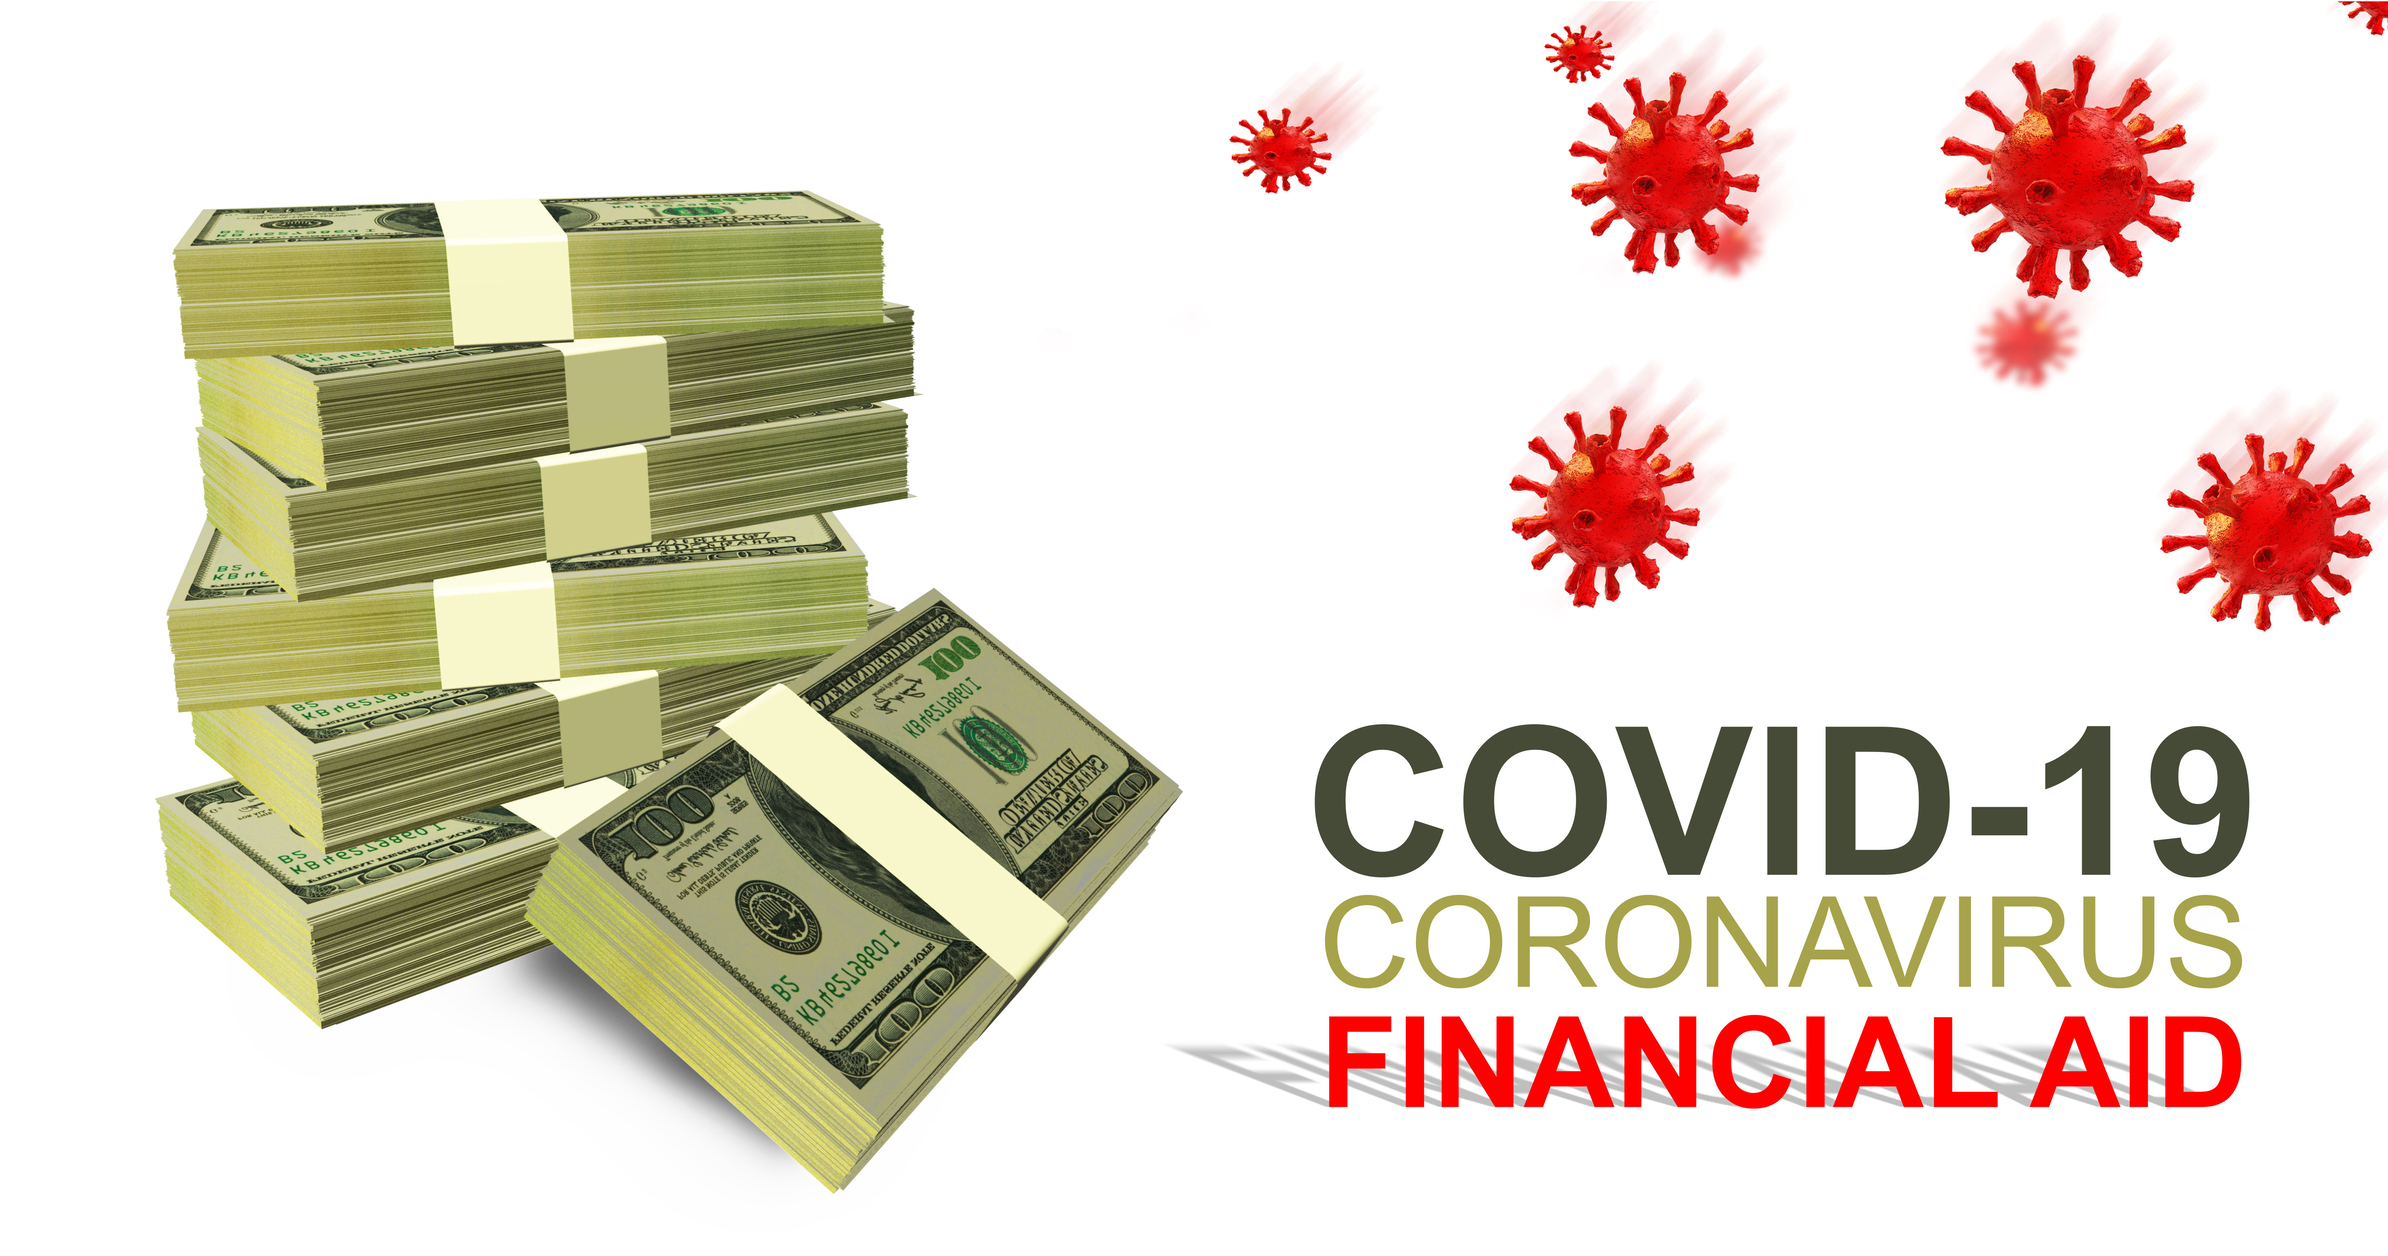 financial aid support help for covid 19 coronavirus therapy 3d rendering 176974421